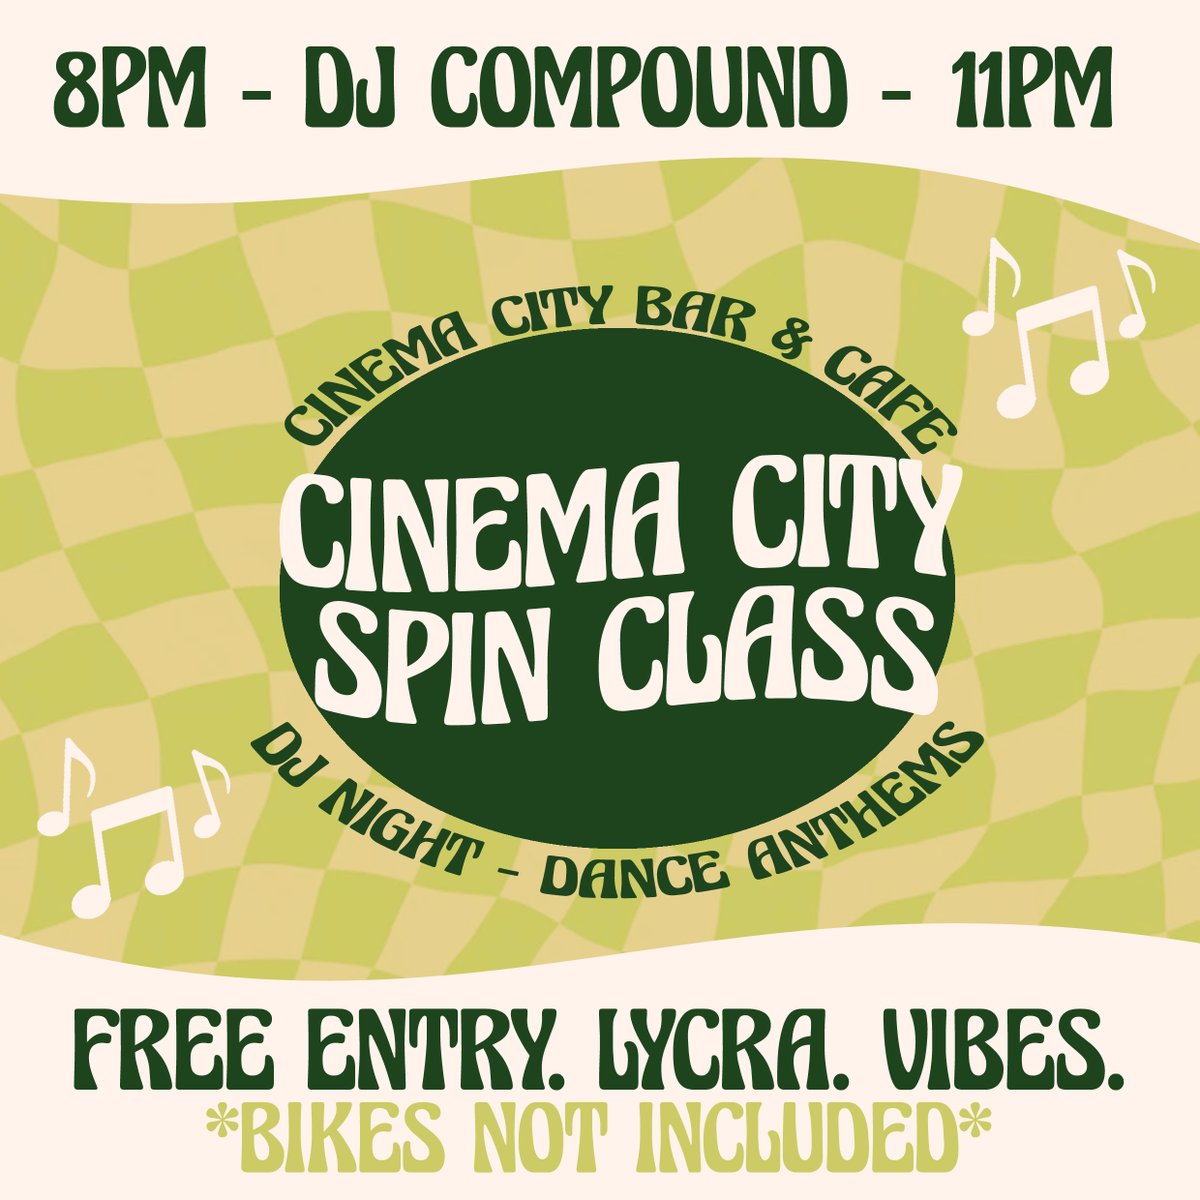 🎵 CINEMA CITY SPIN CLASS 🎵 Bikes are not provided, but good vibes certainly are! #BringYourLycra Join us TONIGHT from 8pm with @djcompound for modern and and classic dance anthems! ✨ See you there! 💃 #DJNight